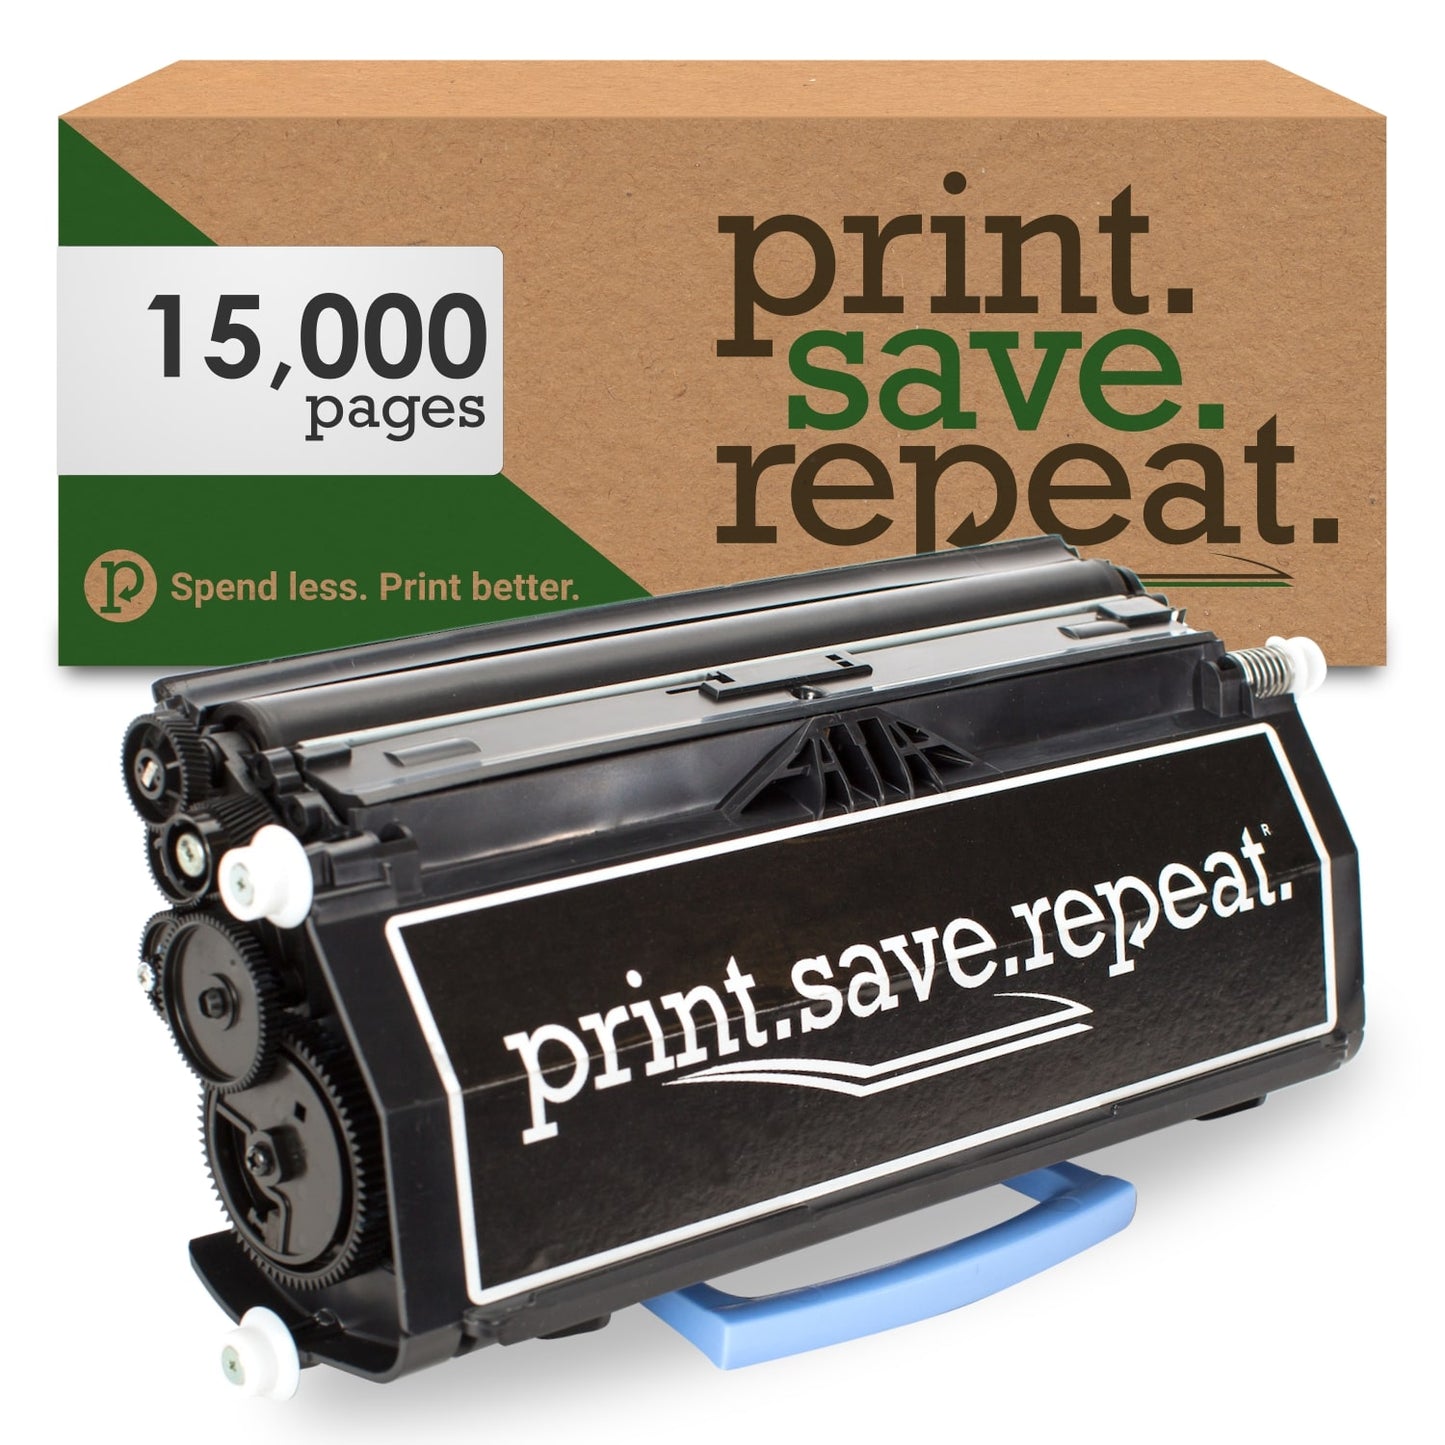 Print.Save.Repeat. Lexmark X463X21G Extra High Yield Remanufactured Toner Cartridge for X463, X464, X466 [15,000 Pages]